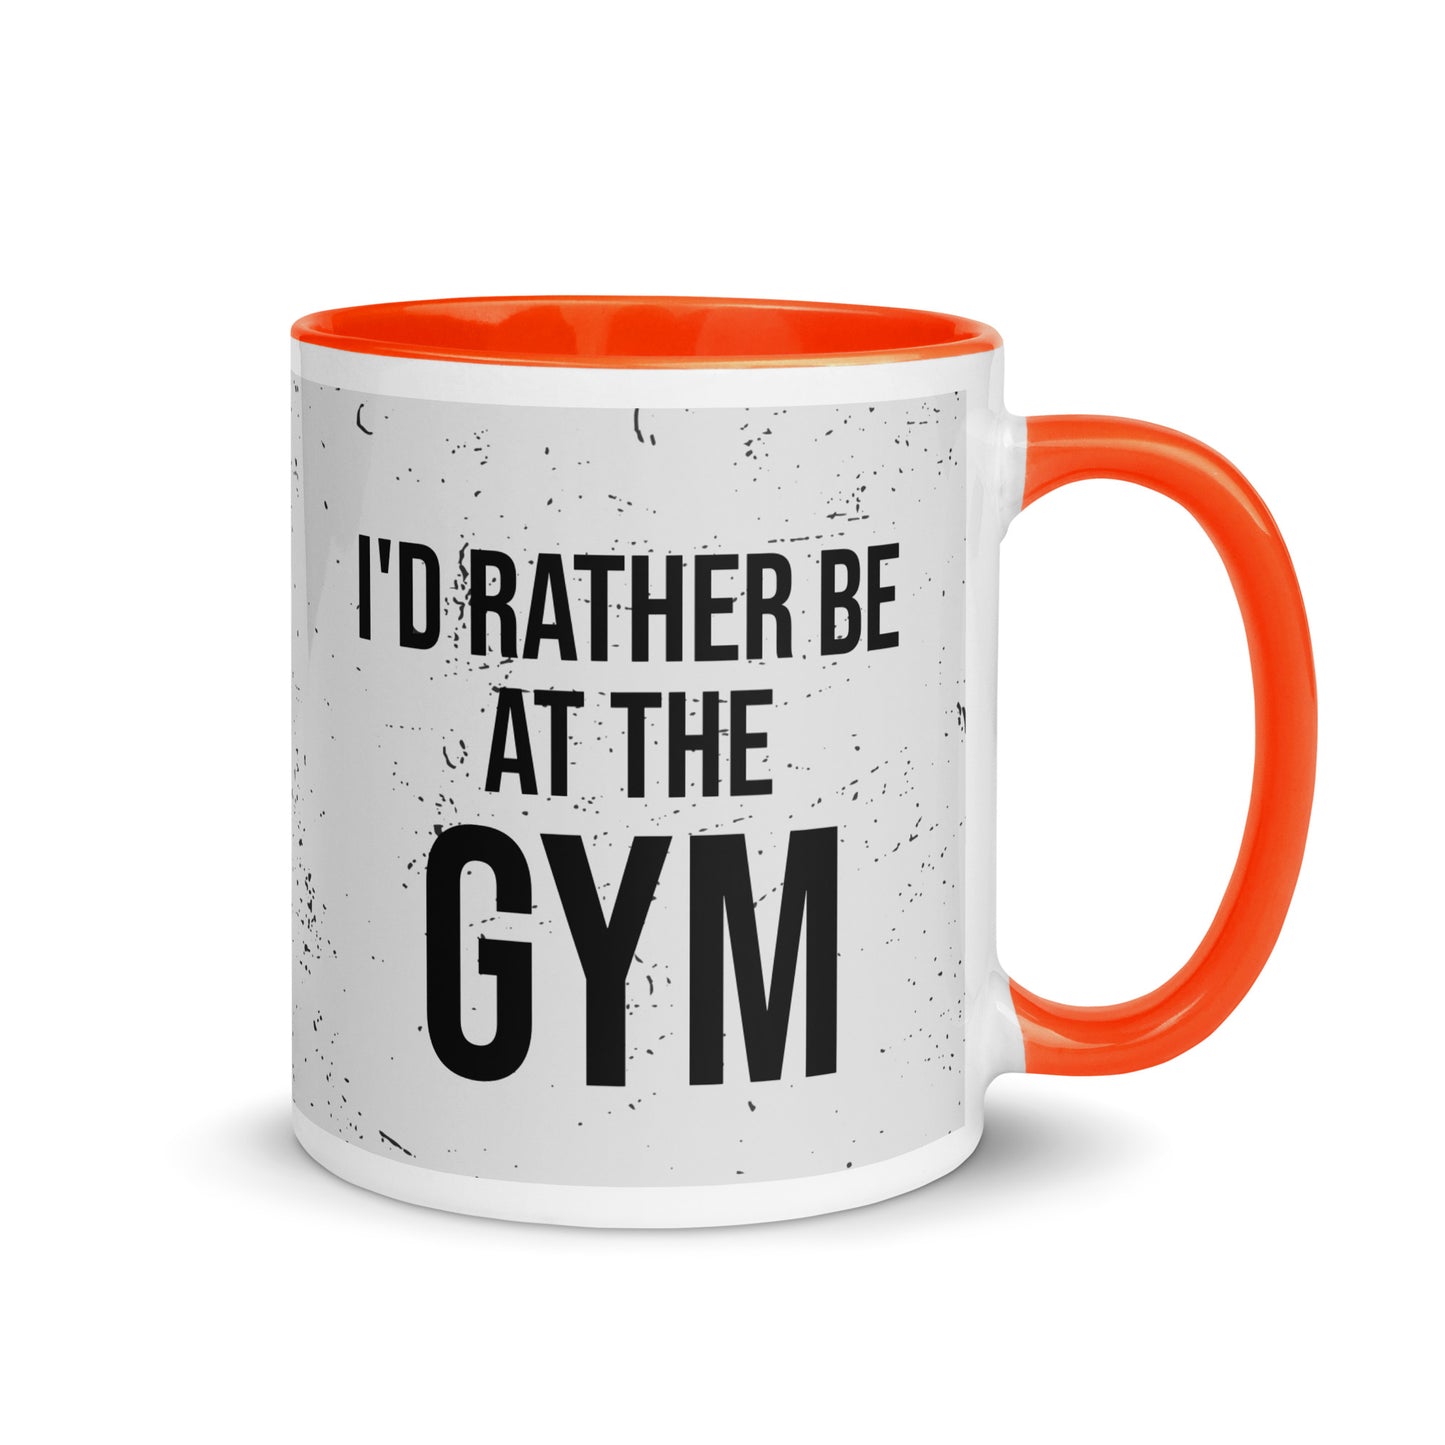 Orange handled mug with I'd rather be at the gym written on it, across a grey splatter background. A gift for someone who loves the gym.